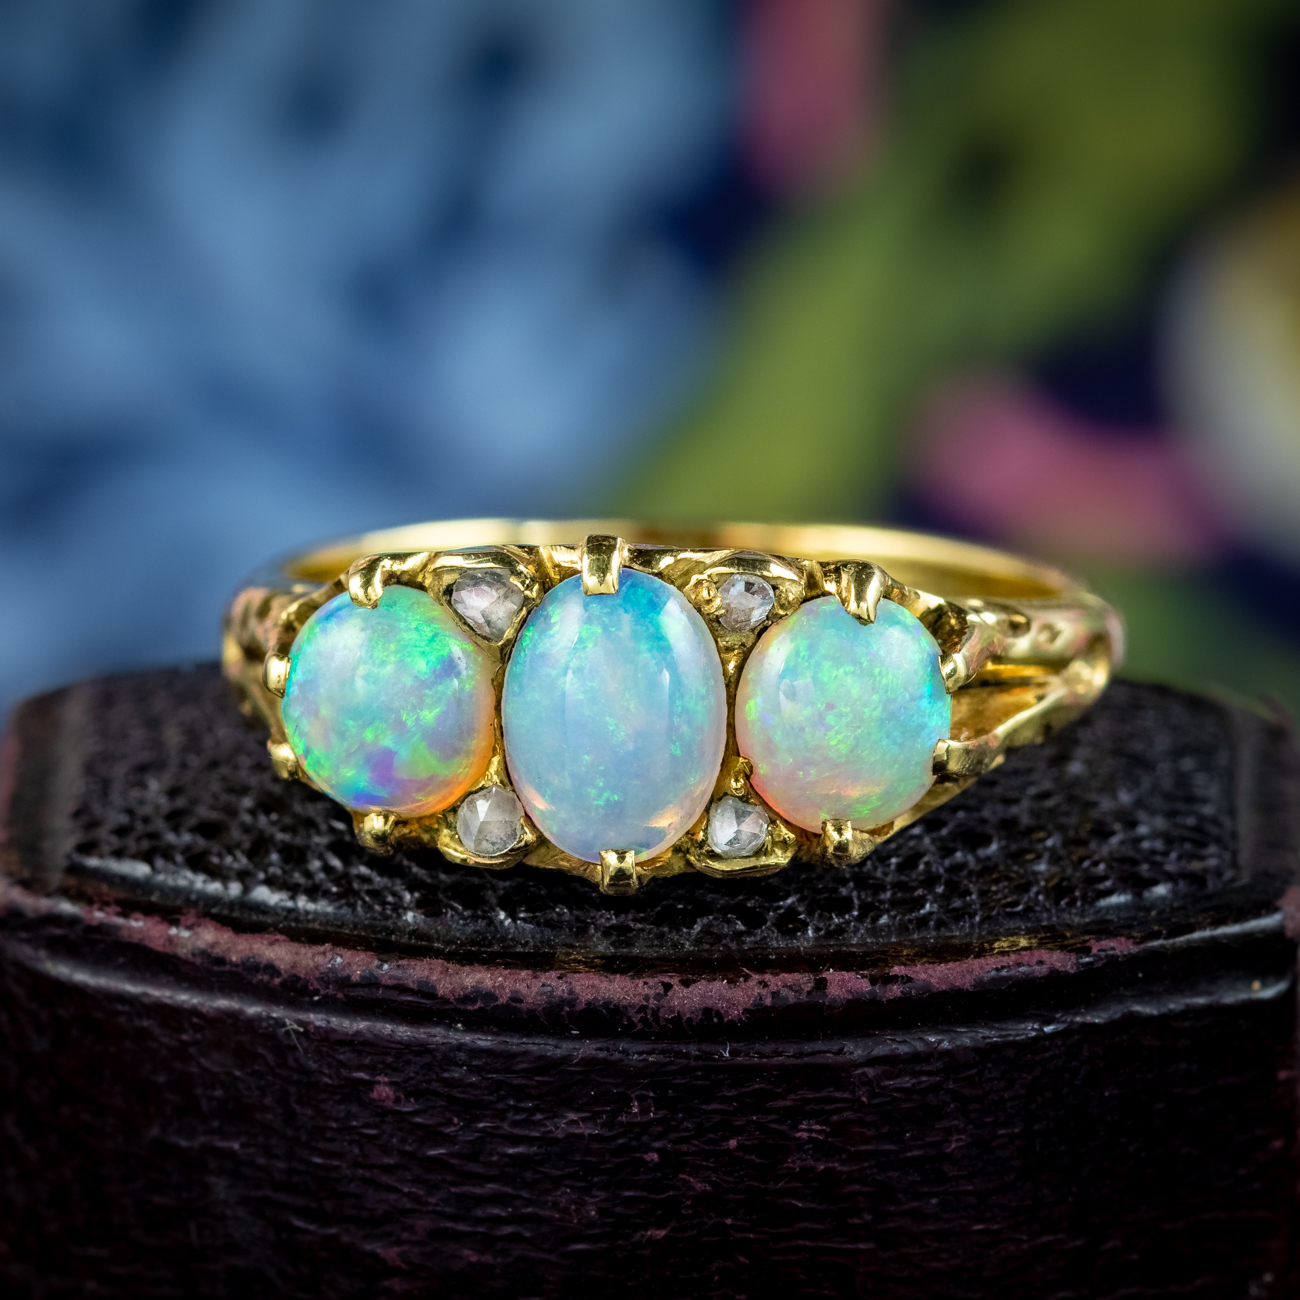 Antique Victorian Opal Diamond Trilogy Ring 0.90ct Total